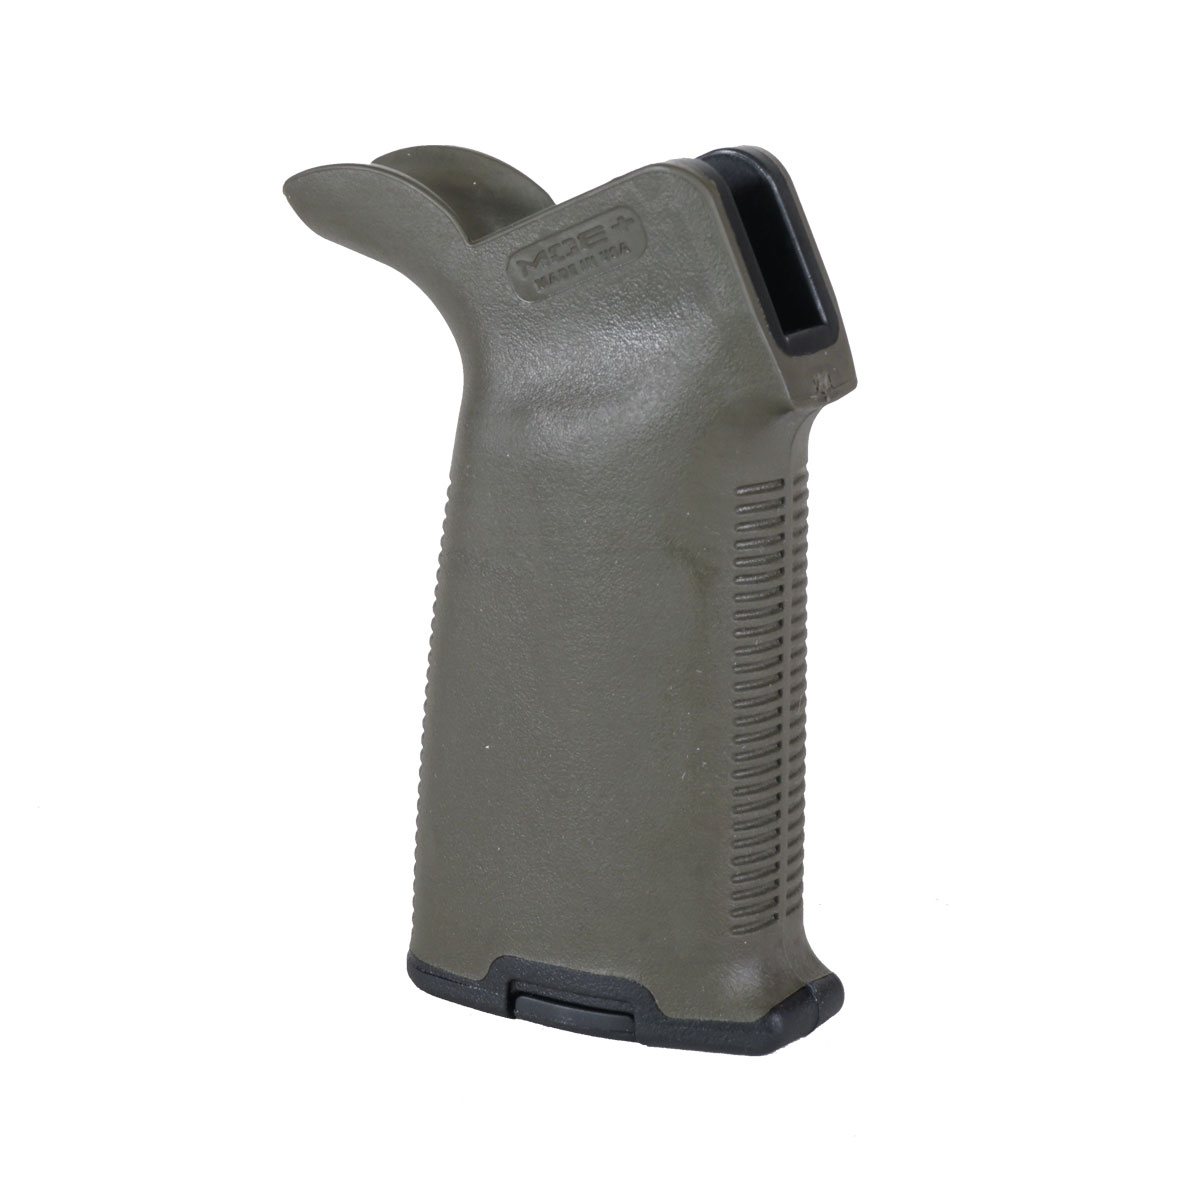 Magpul Industries, MOE Grip, Fits AR Rifles, with Storage Compartment, Olive Drab Green